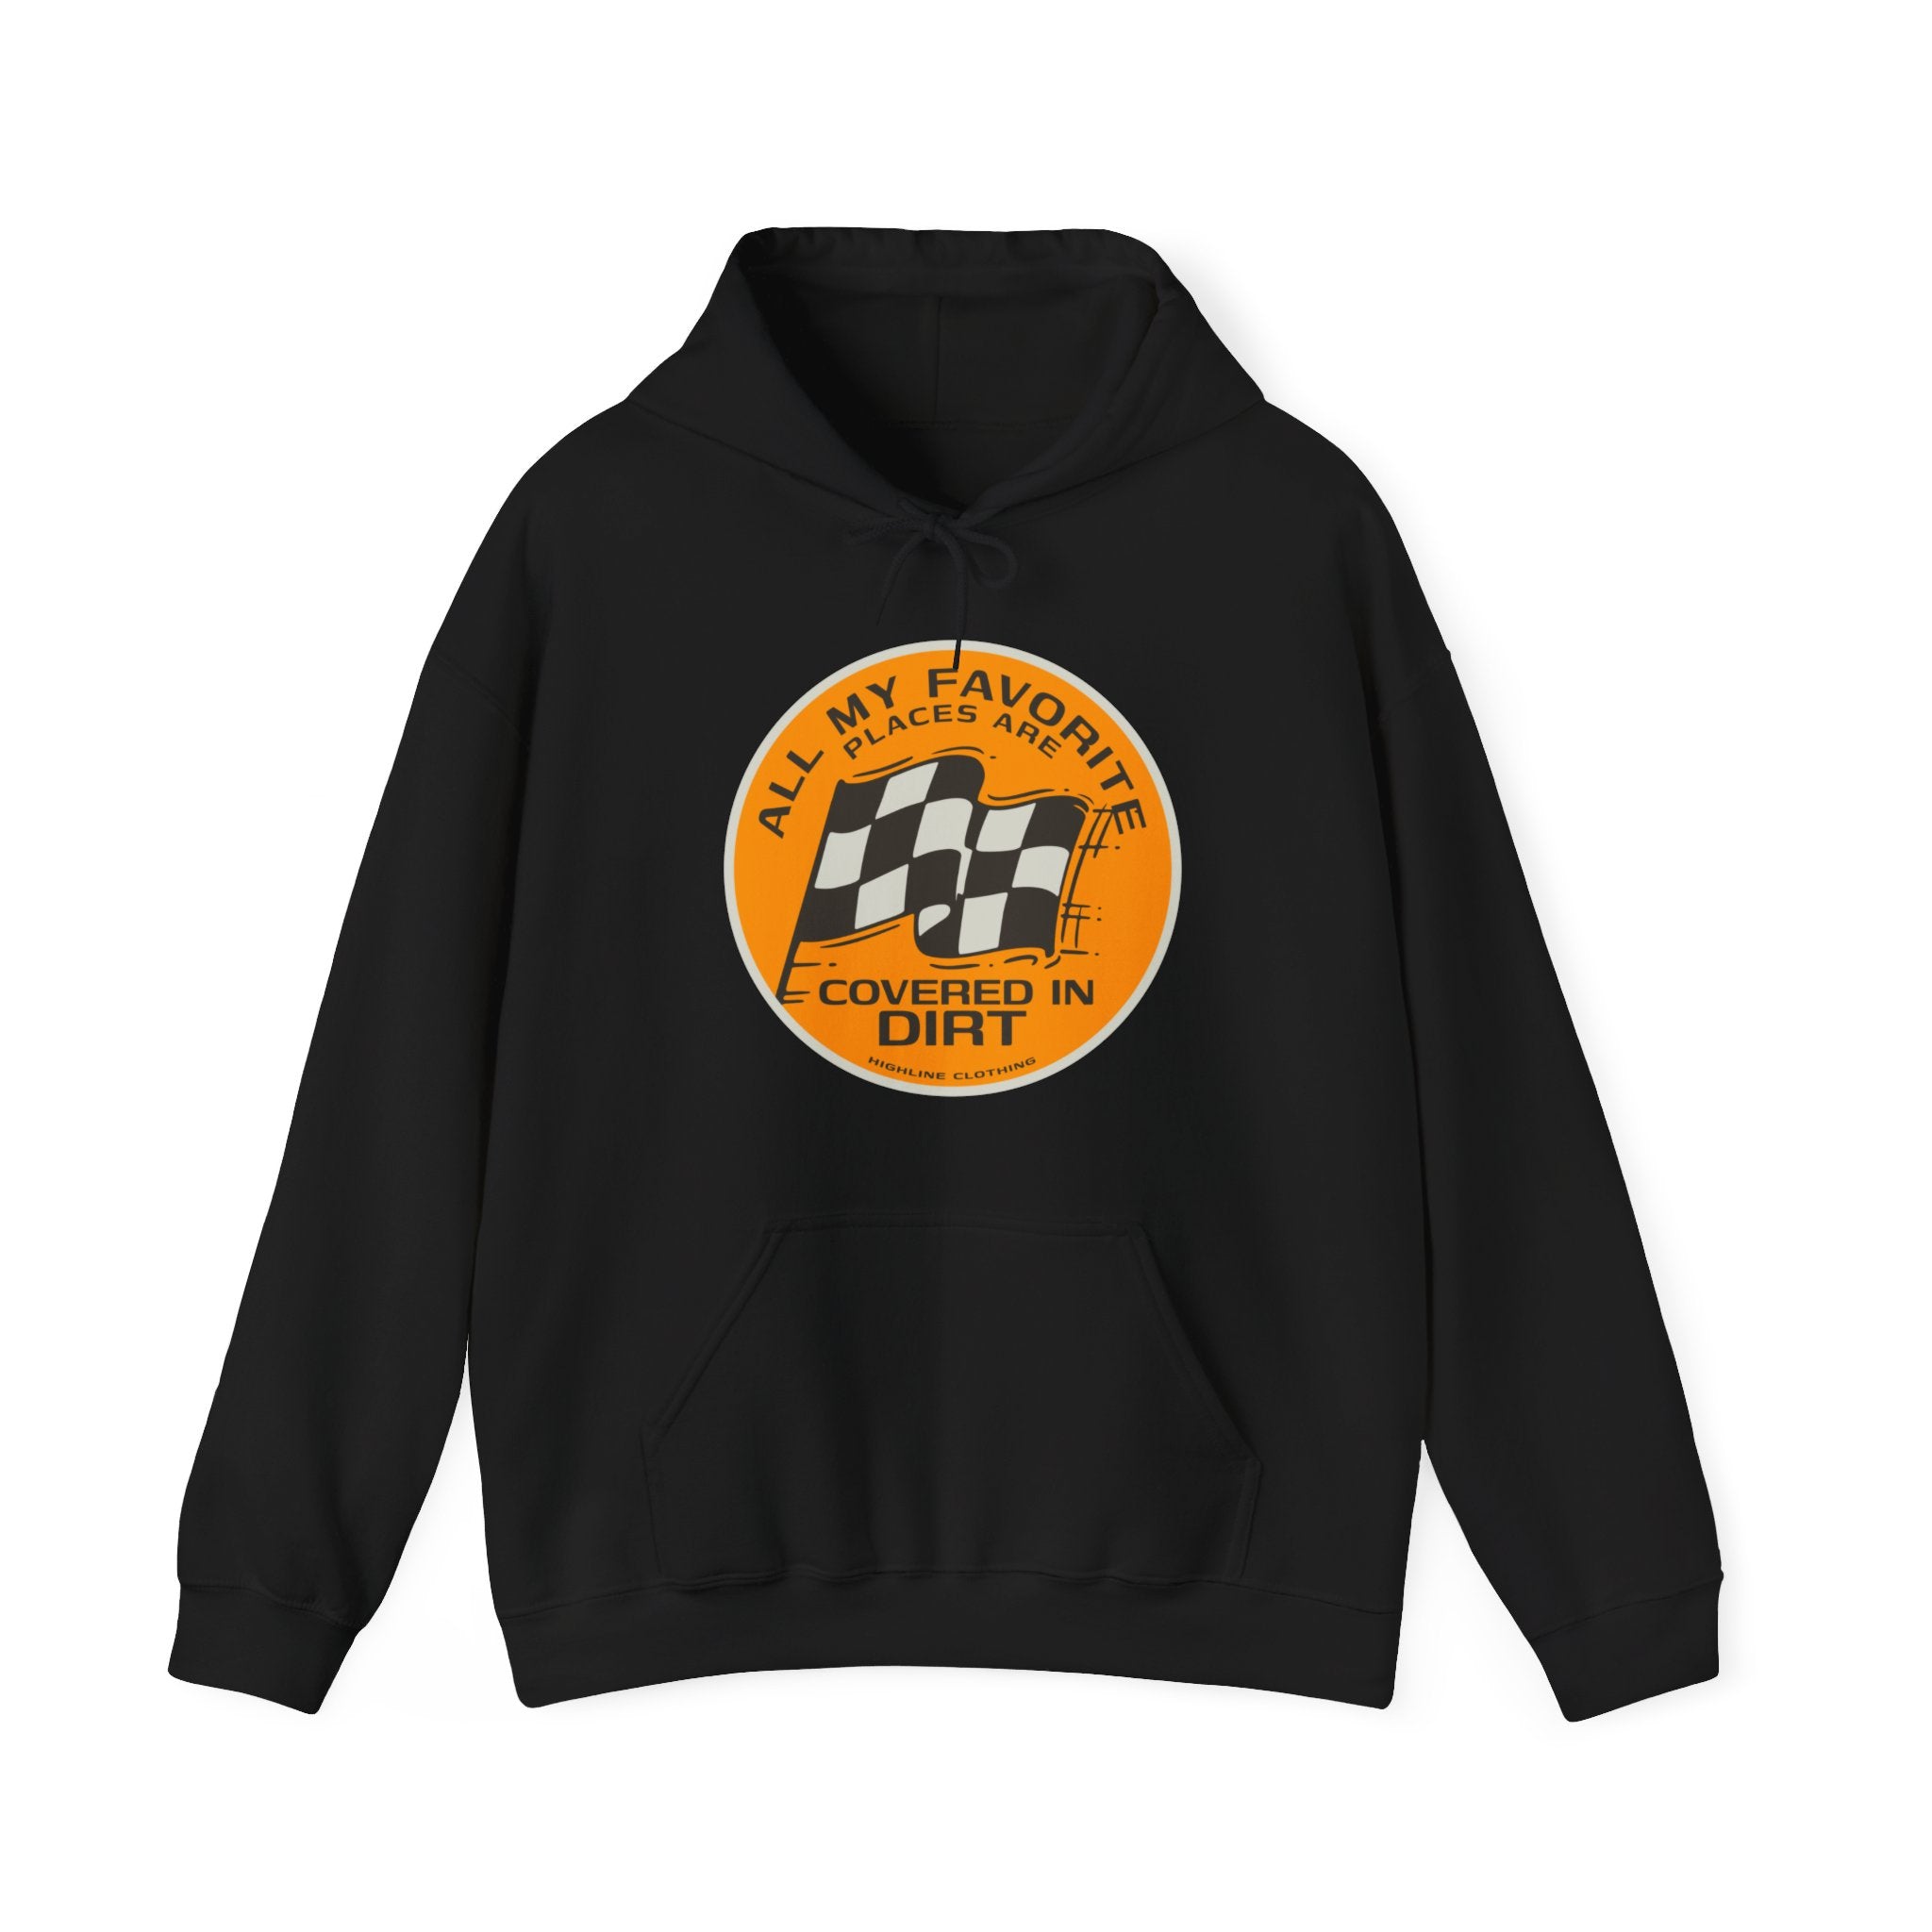 All My Favorite Places are Covered in Dirt Unisex Hooded Sweatshirt